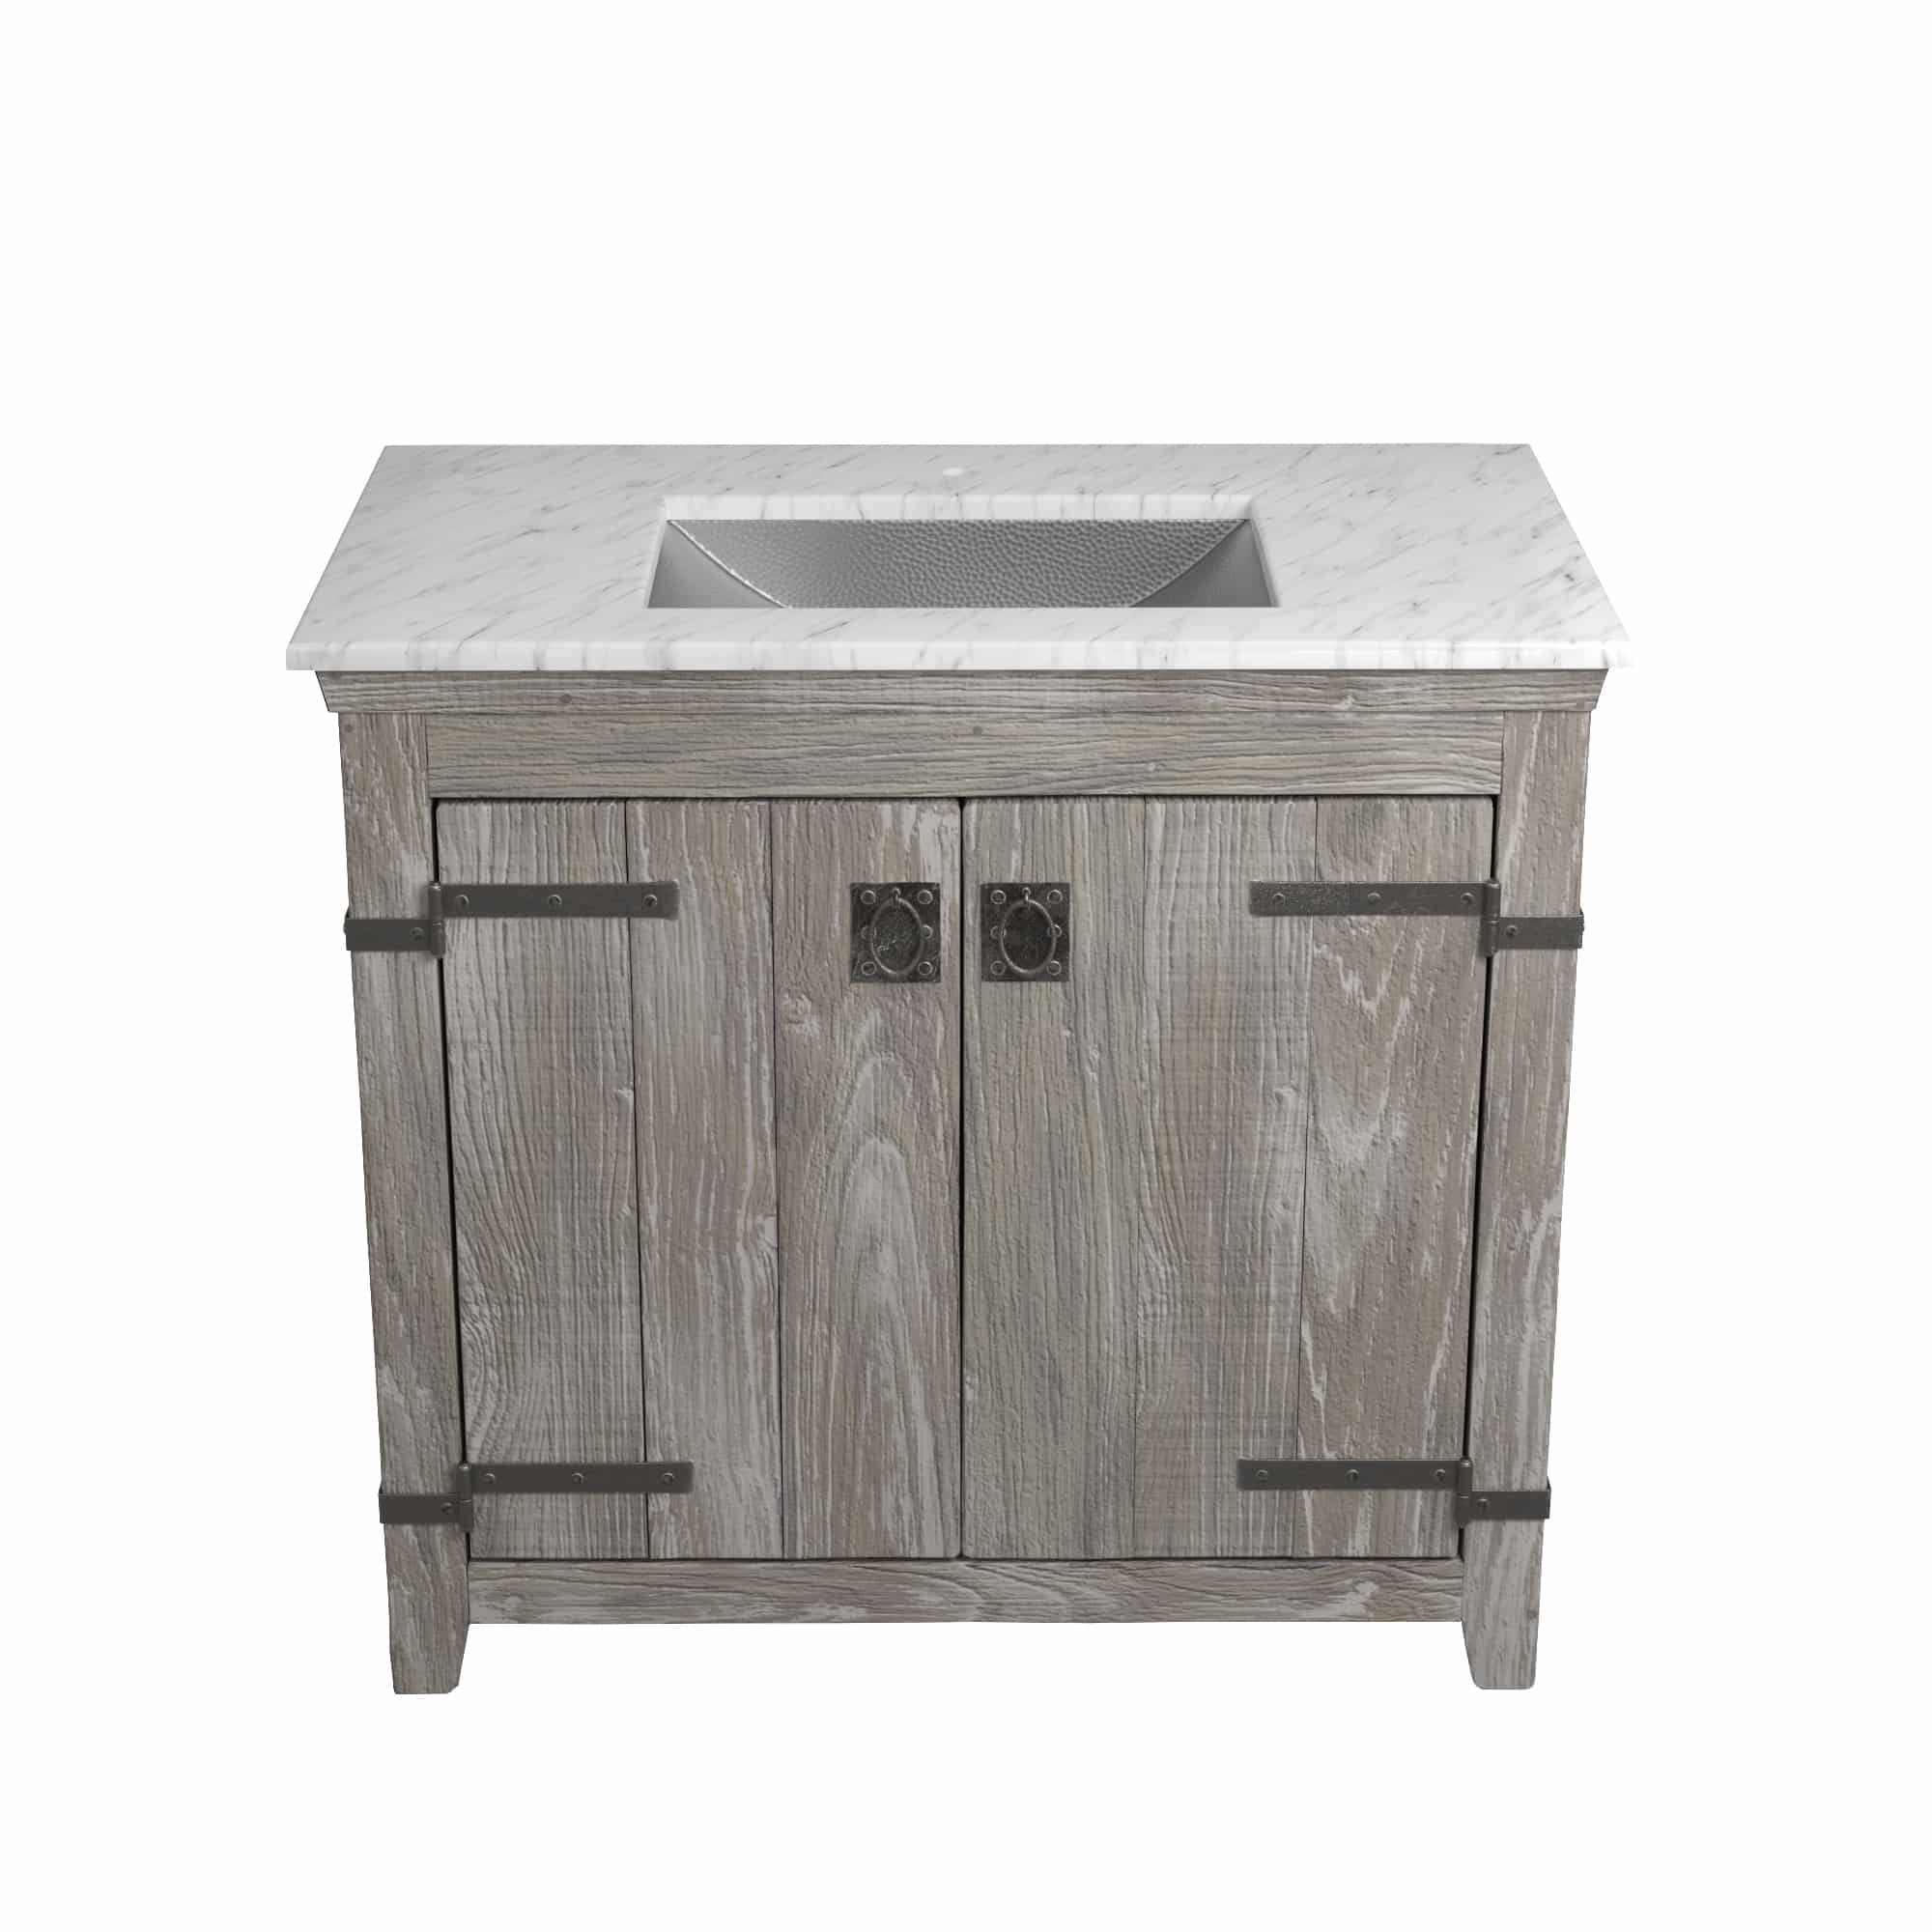 Native Trails 36" Americana Vanity in Driftwood with Carrara Marble Top and Avila in Brushed Nickel, Single Faucet Hole, BND36-VB-CT-CP-023